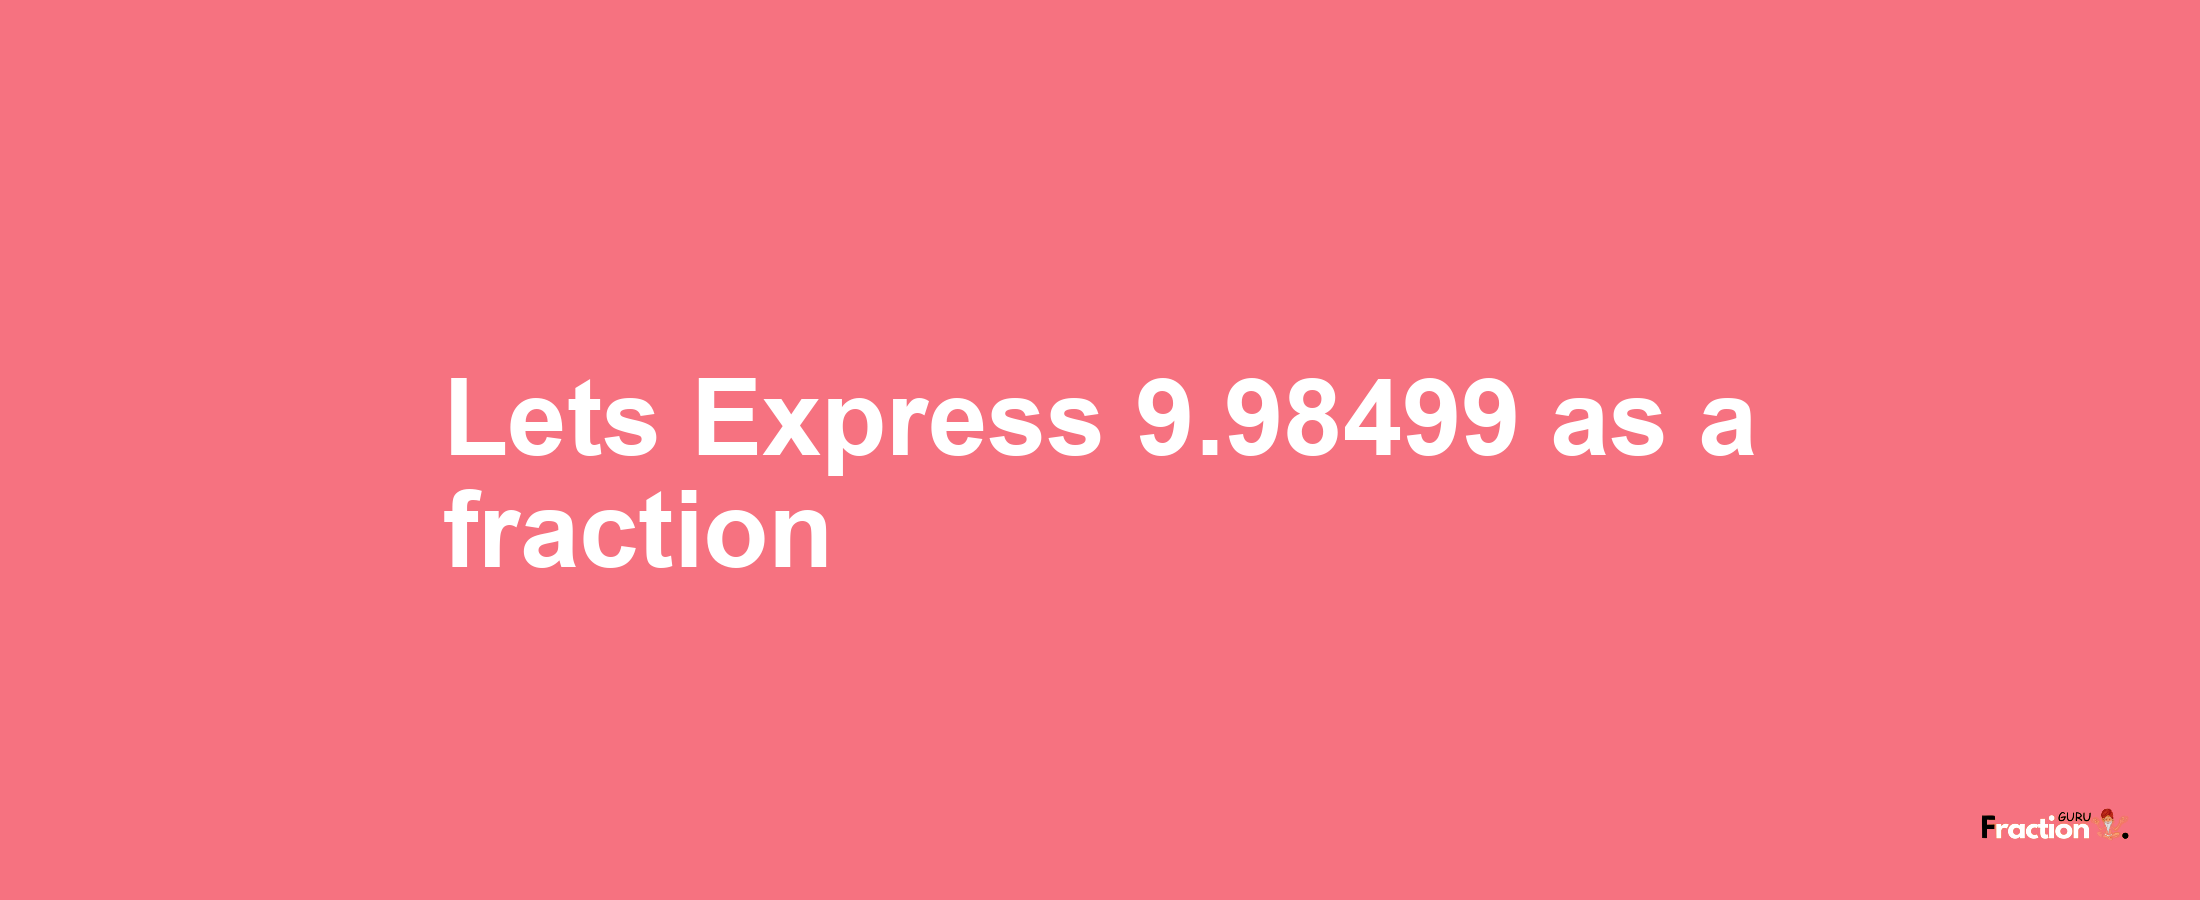 Lets Express 9.98499 as afraction